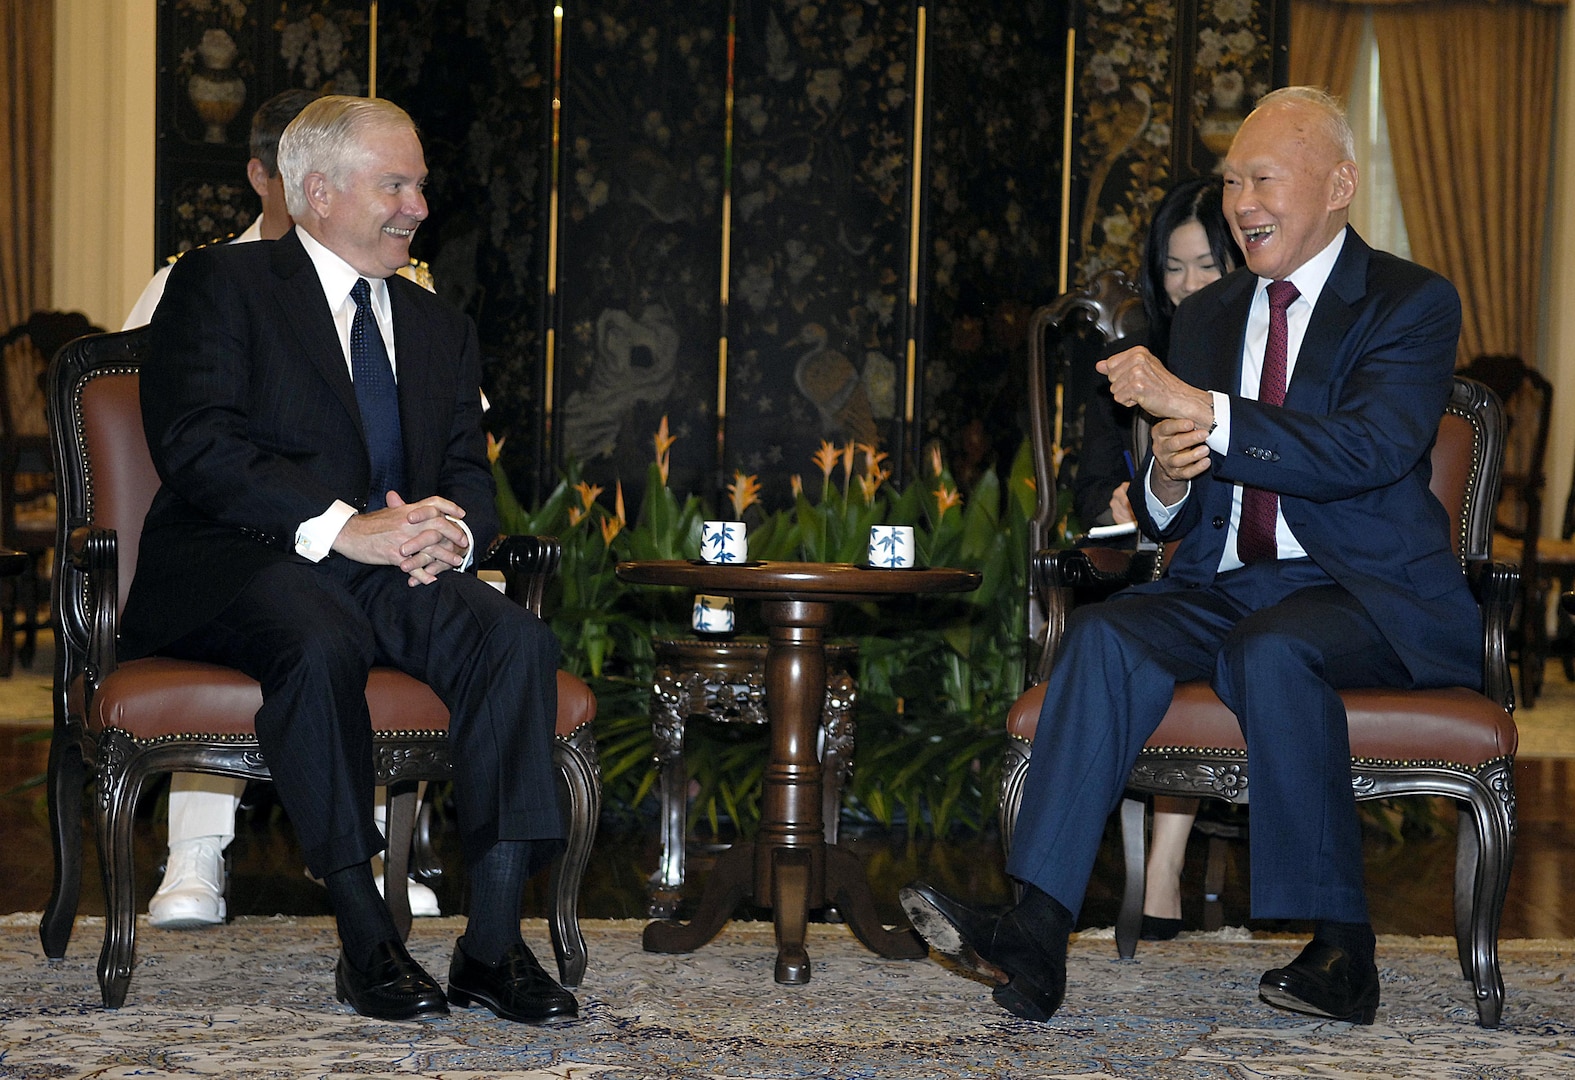 Defense Secretary Robert M. Gates shares a laugh with Singapore Minister Mentor Lee Kuan Yew during a meeting in Singapore, June 2, 2007. Gates was in Singapore to attend the 6th International Institute for Strategic Studies conference, the Shangri-La Dialogue. Defense Dept. photo by Cherie A. Thurlby